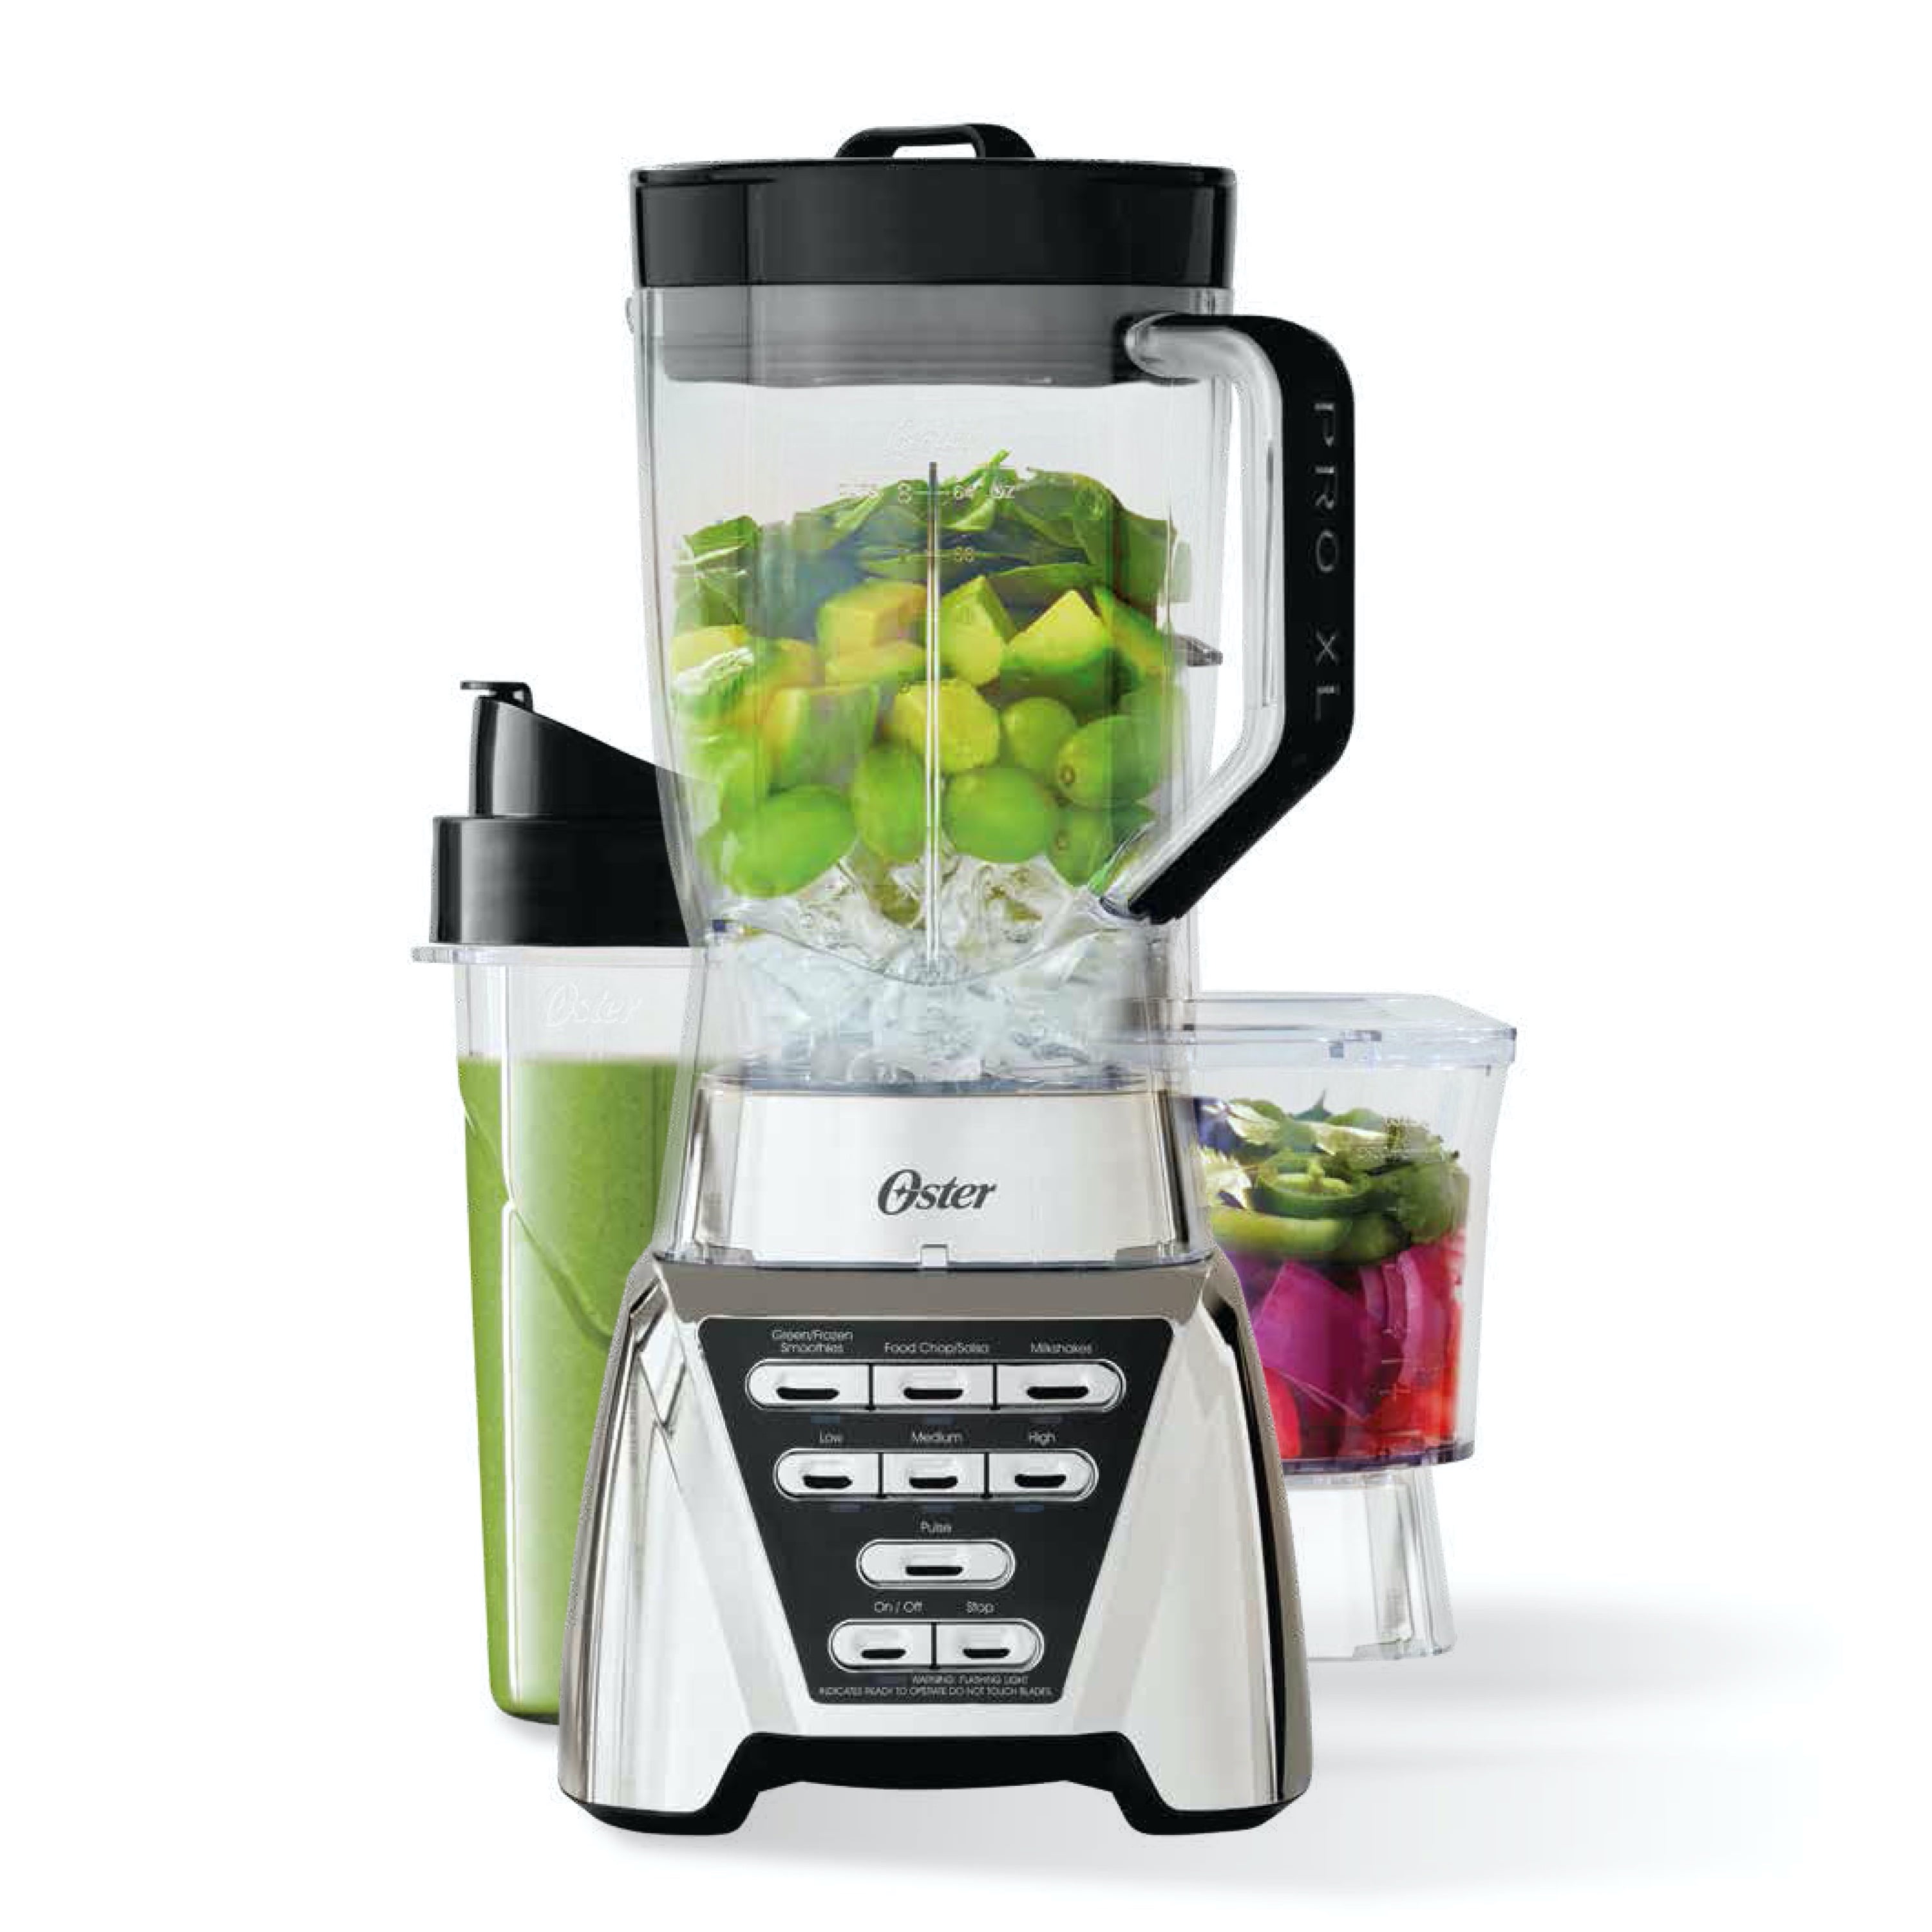  Oster Pro 1200 Blender with Professional Tritan Jar and Food  Processor attachment, Metallic Grey: Home & Kitchen